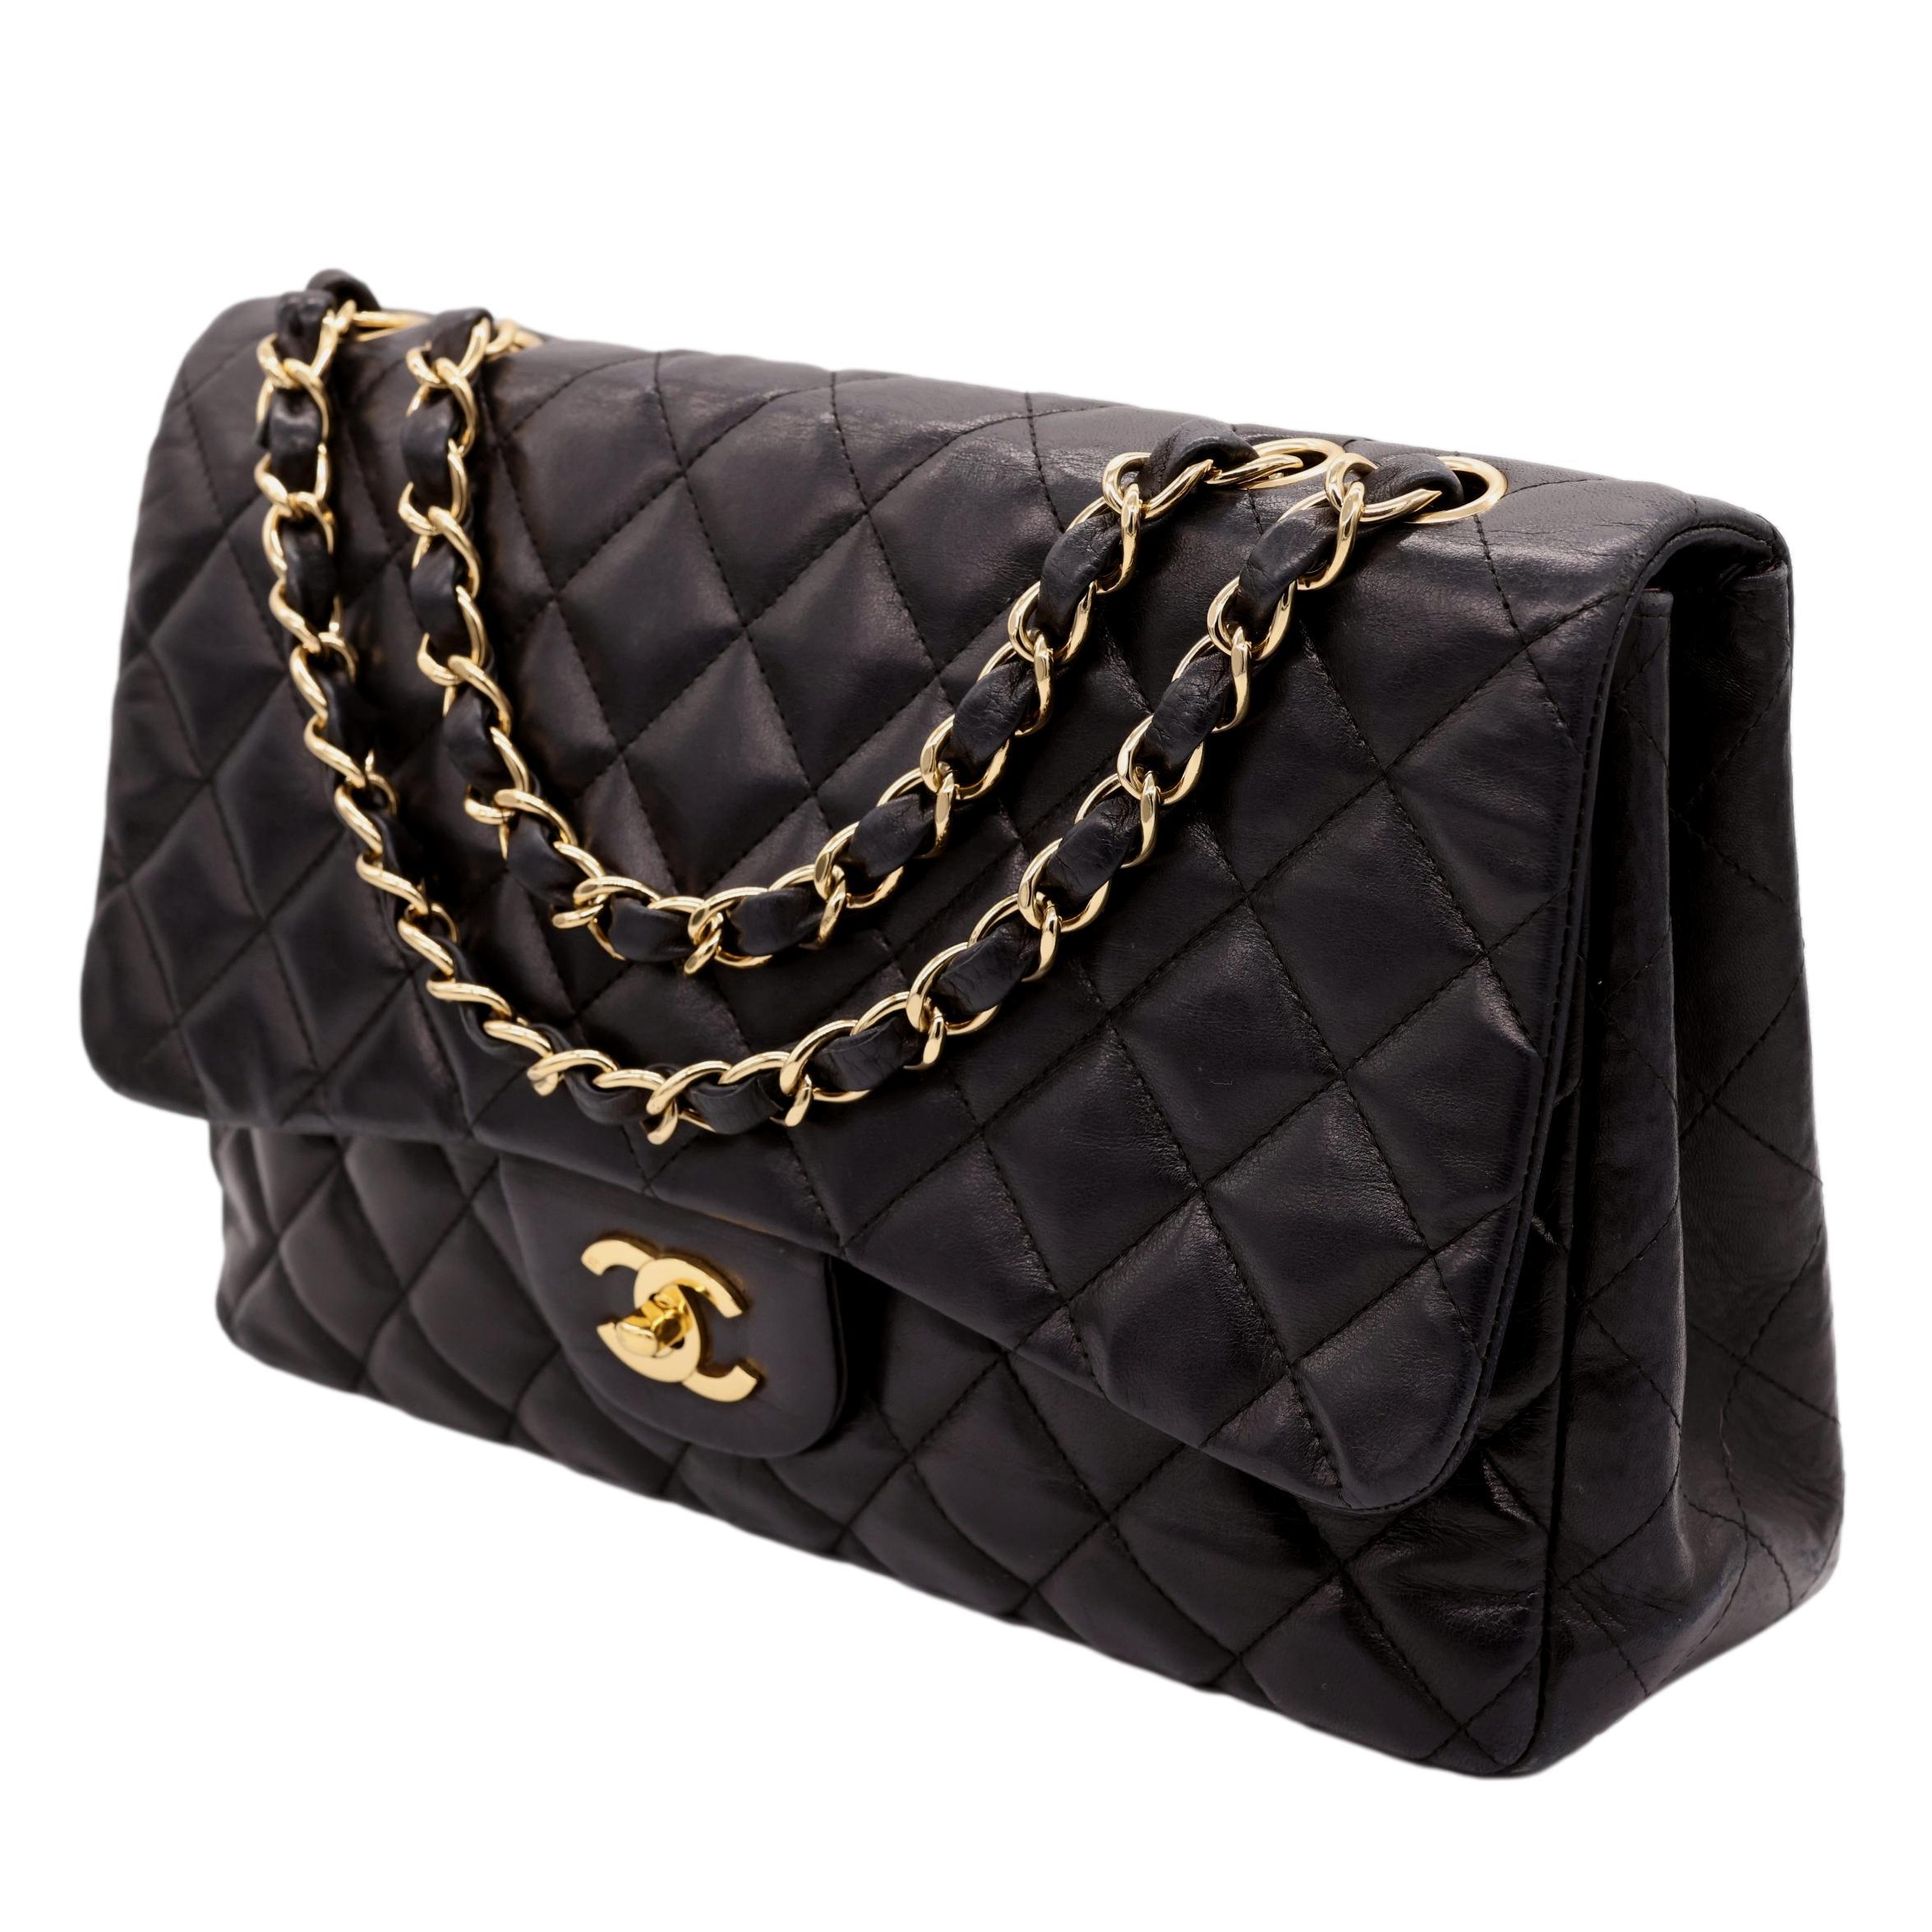 black chanel bag with red interior